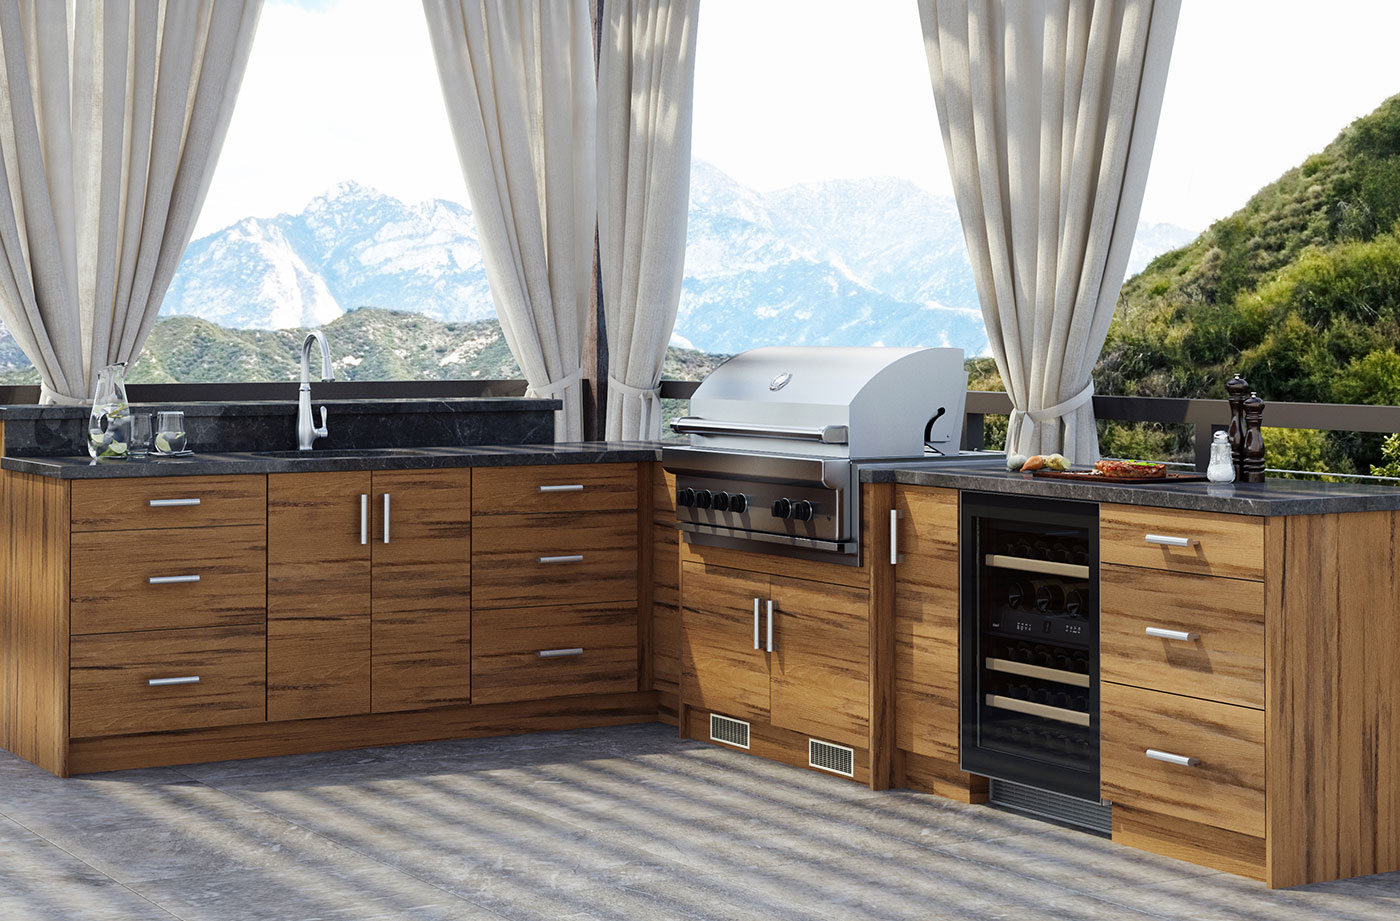 WeatherStrong Outdoor Cabinets for Your Outdoor Kitchen